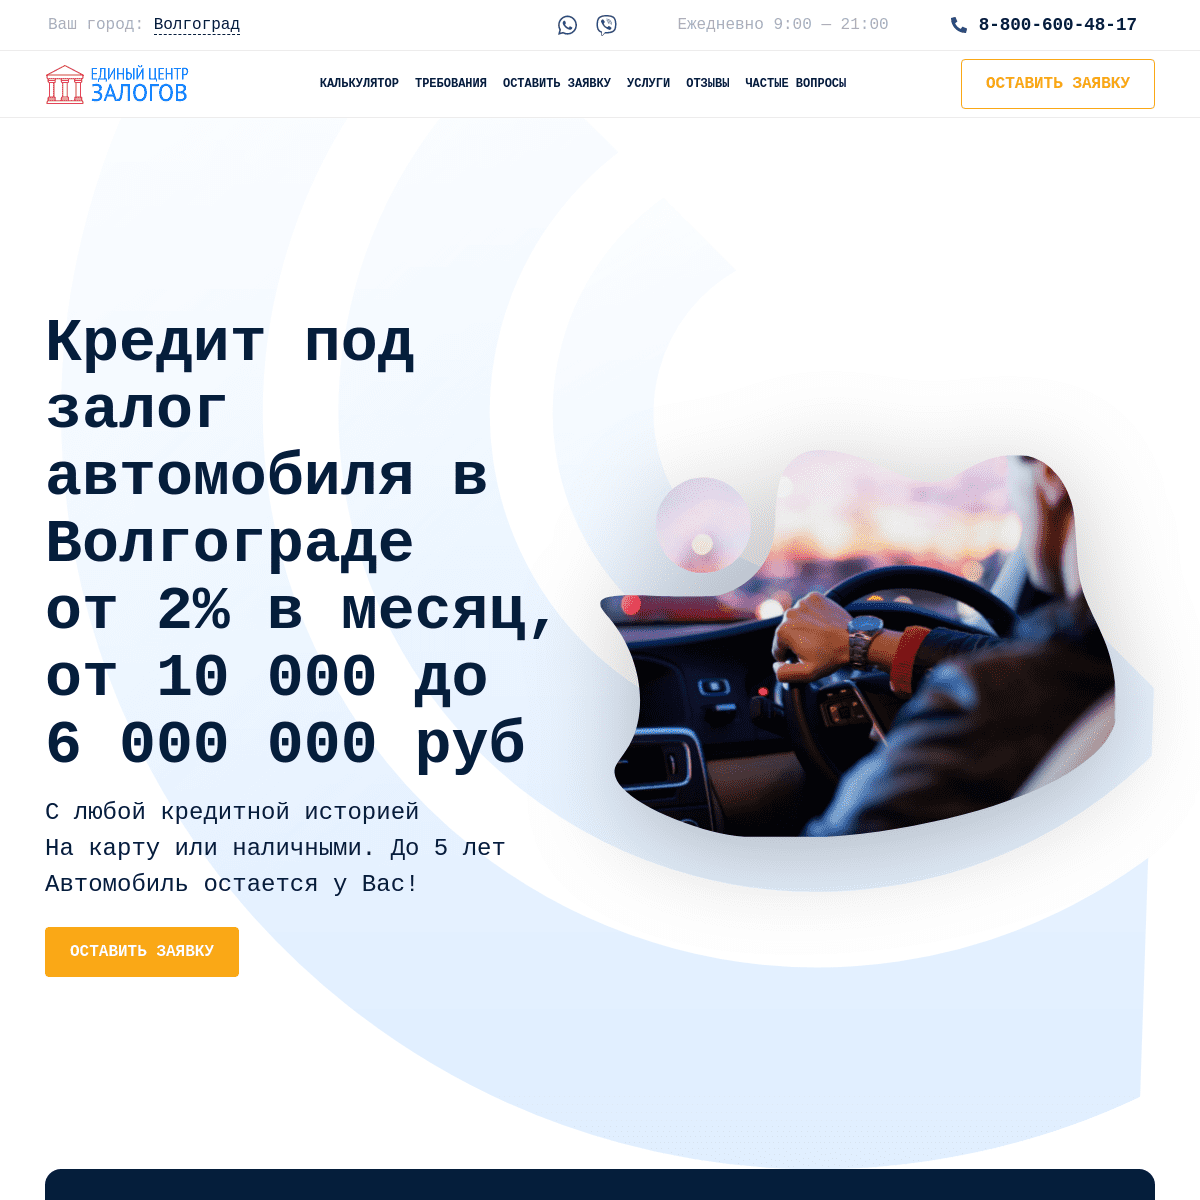 A complete backup of https://lombard-invest.ru